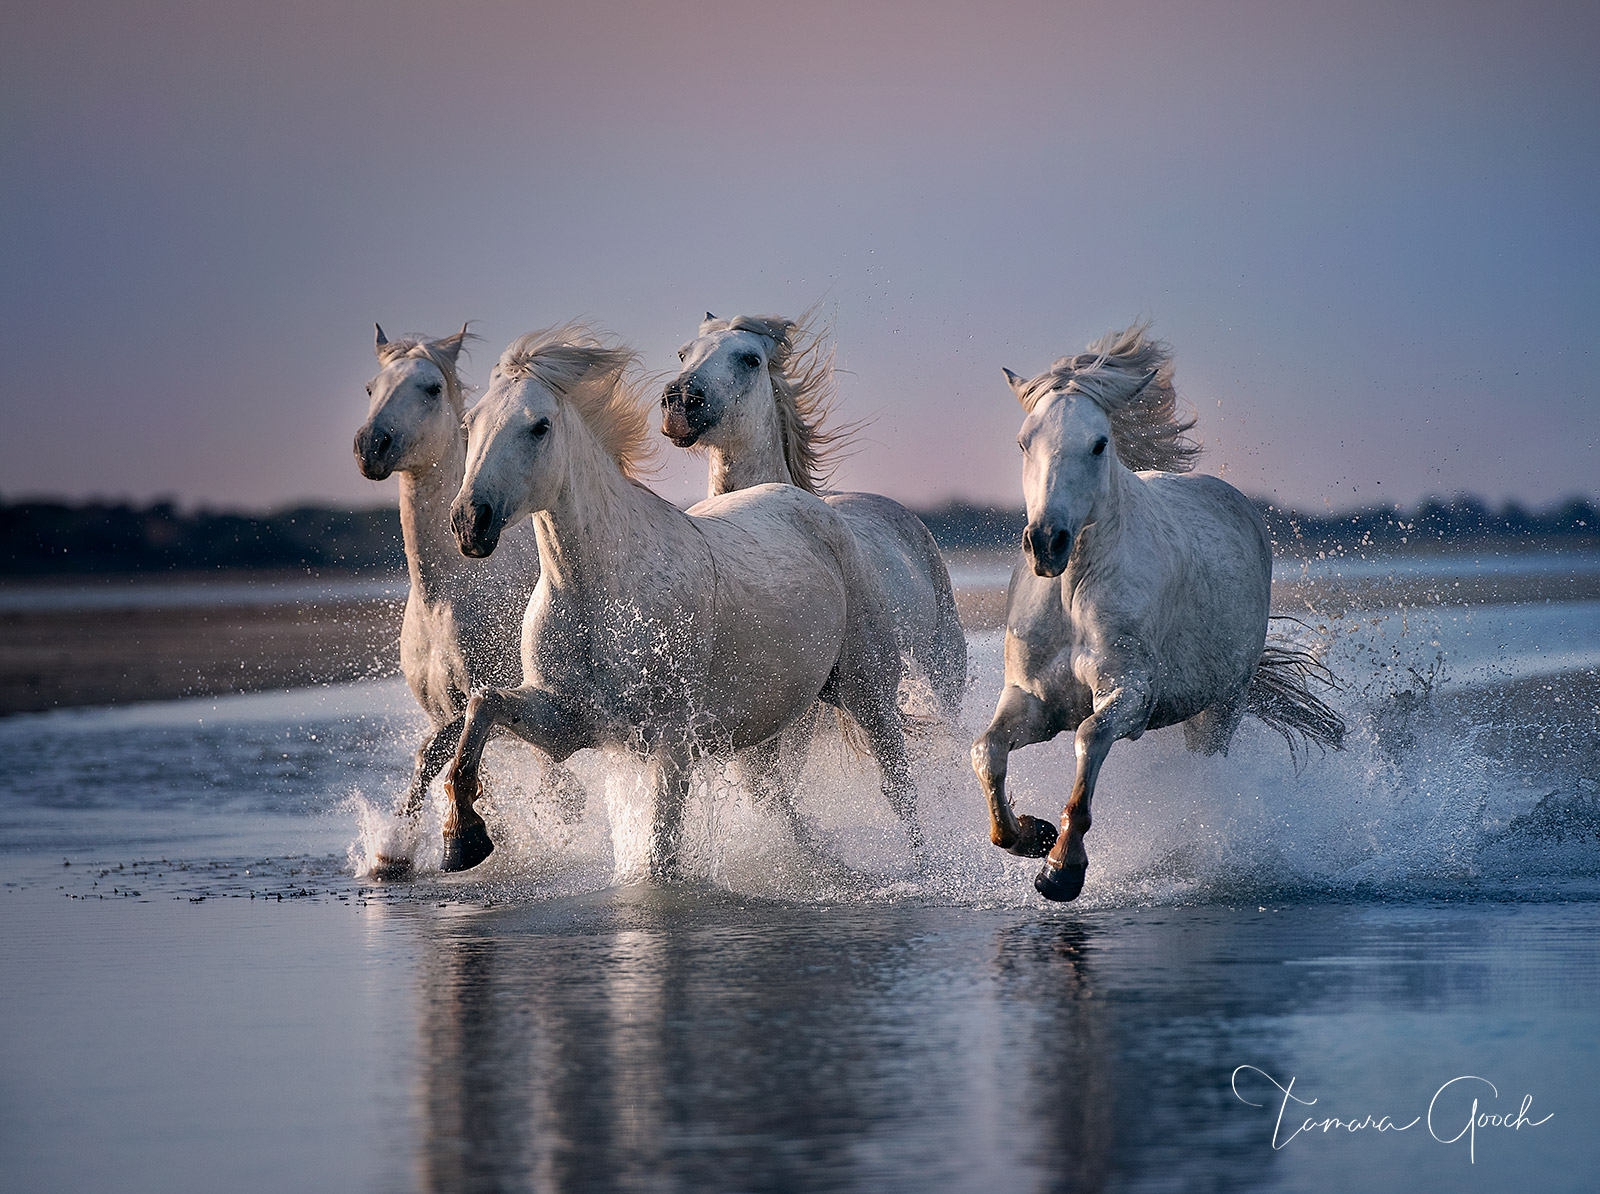 Limited Edition Print of 50 White Angle Horses is a limited edition museum-quality fine art print that will match a wide variety...